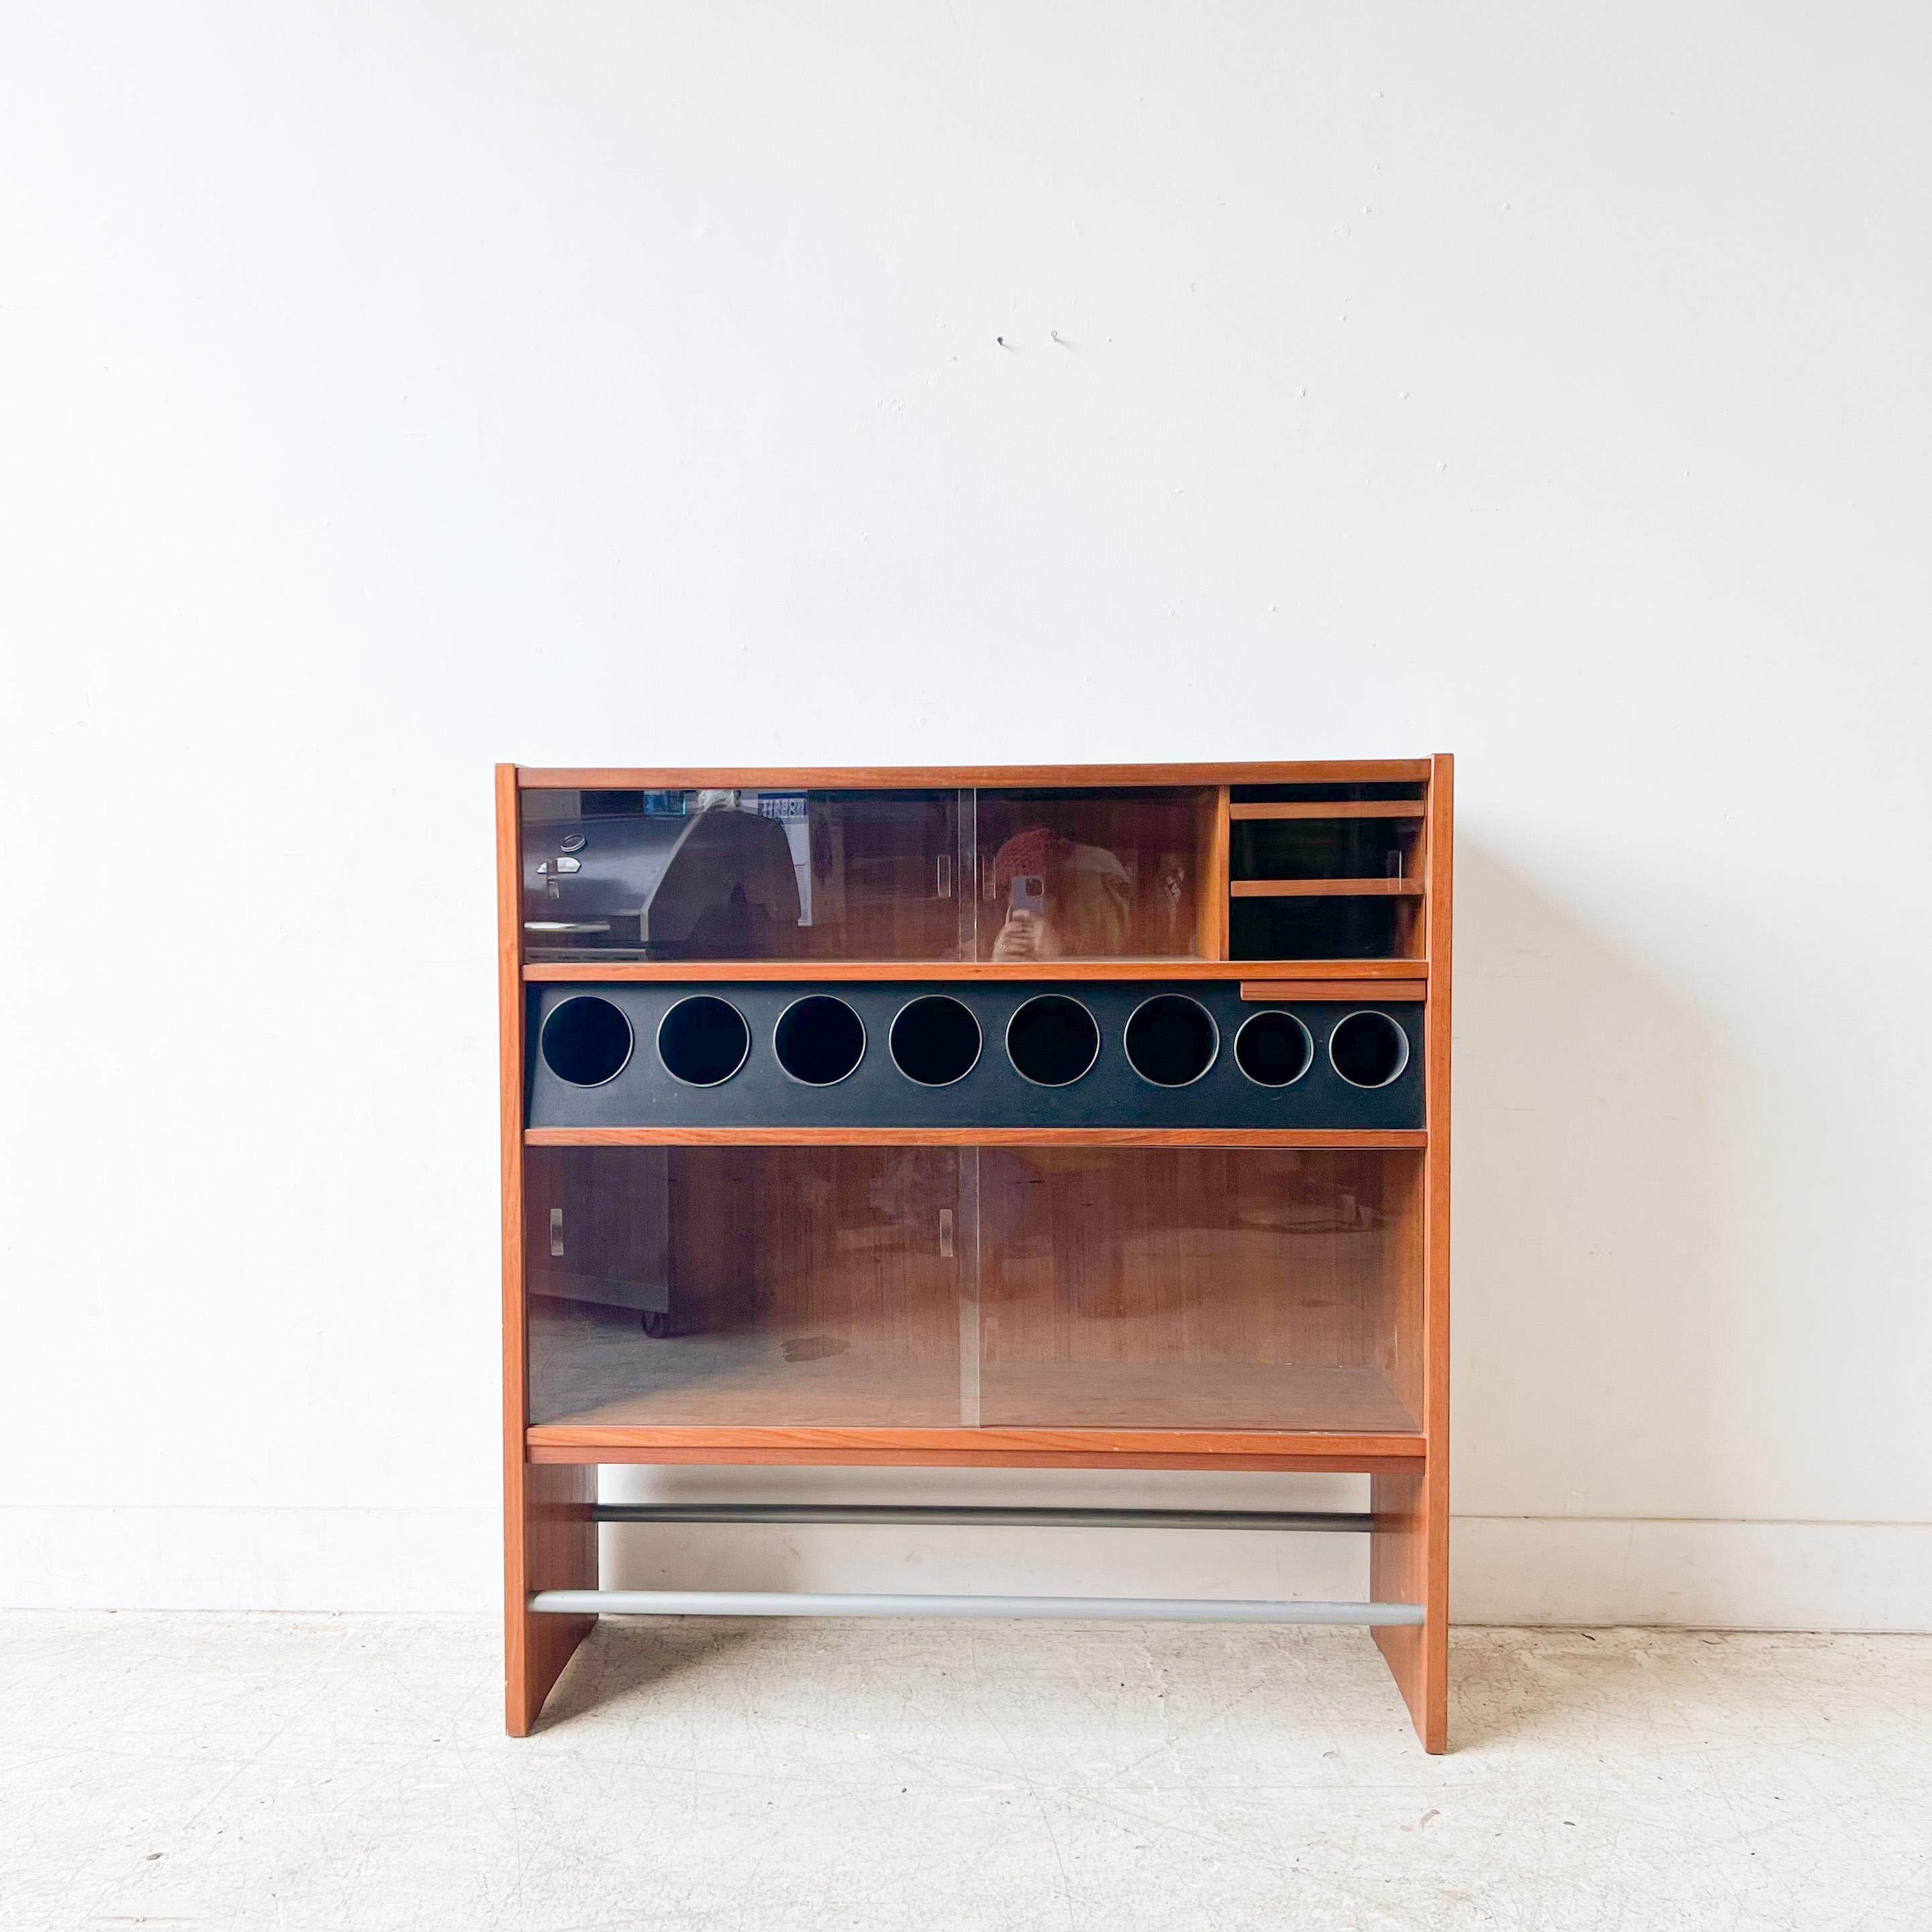 Mid-Century Modern Danish teak dry bar by Erik Buch. He was a Danish industrial designer that focused on the Scandinavian modern style. Buch’s organic and functional aesthetic resulted in furniture that spanned chairs, stools, and cabinets. Like